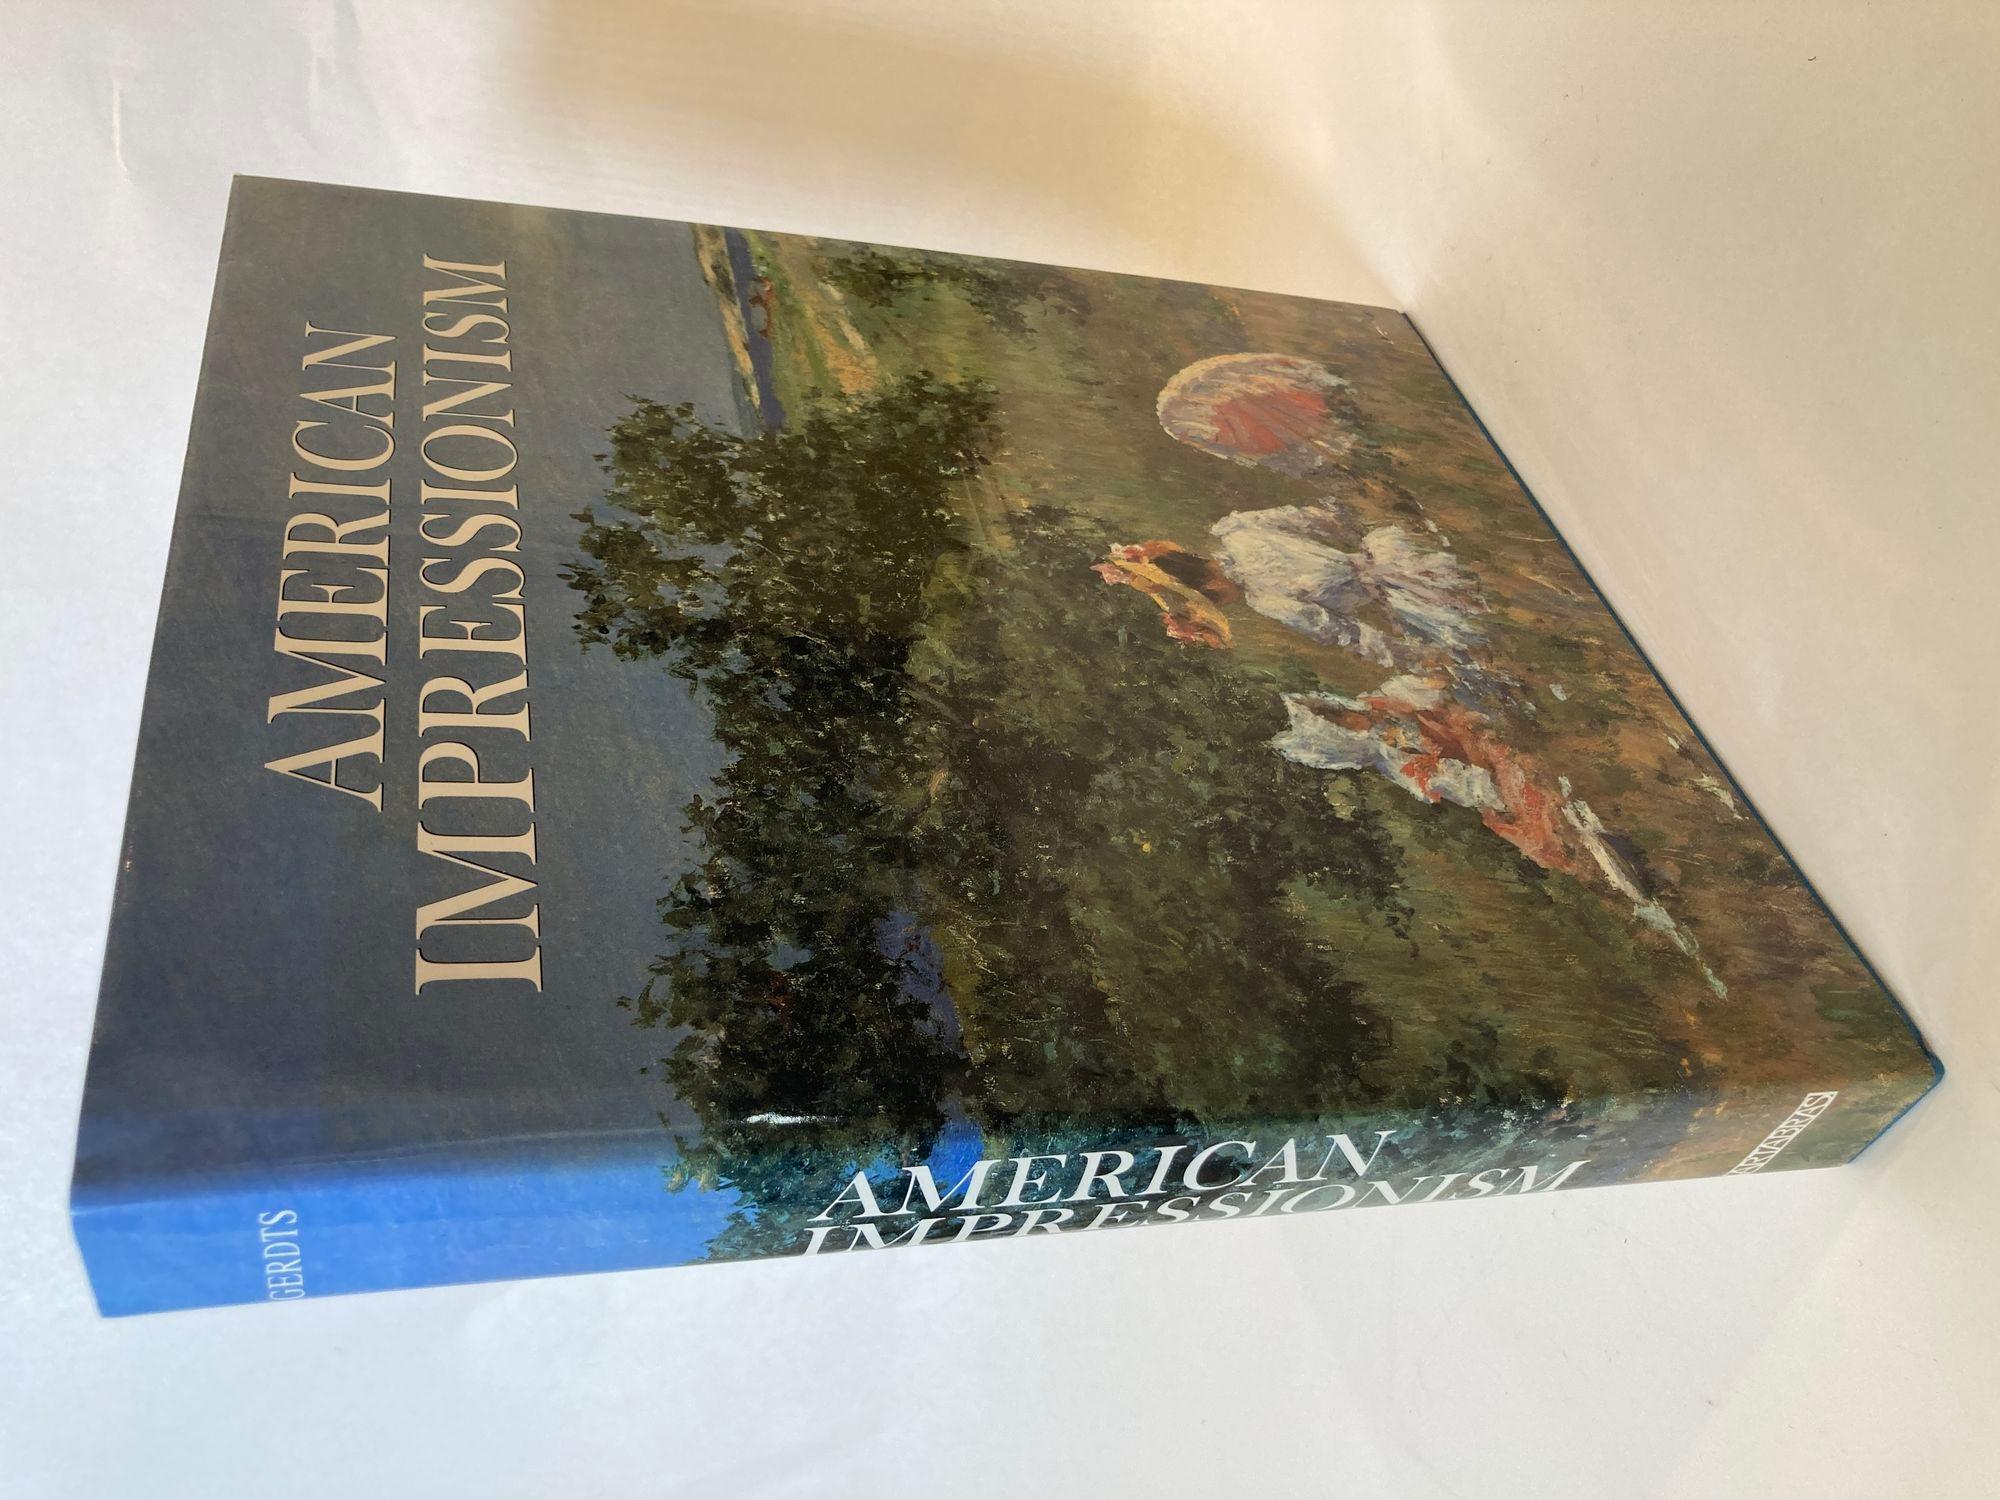 20th Century American Impressionism Oversized Hardcover Book by William H. Gerdts For Sale